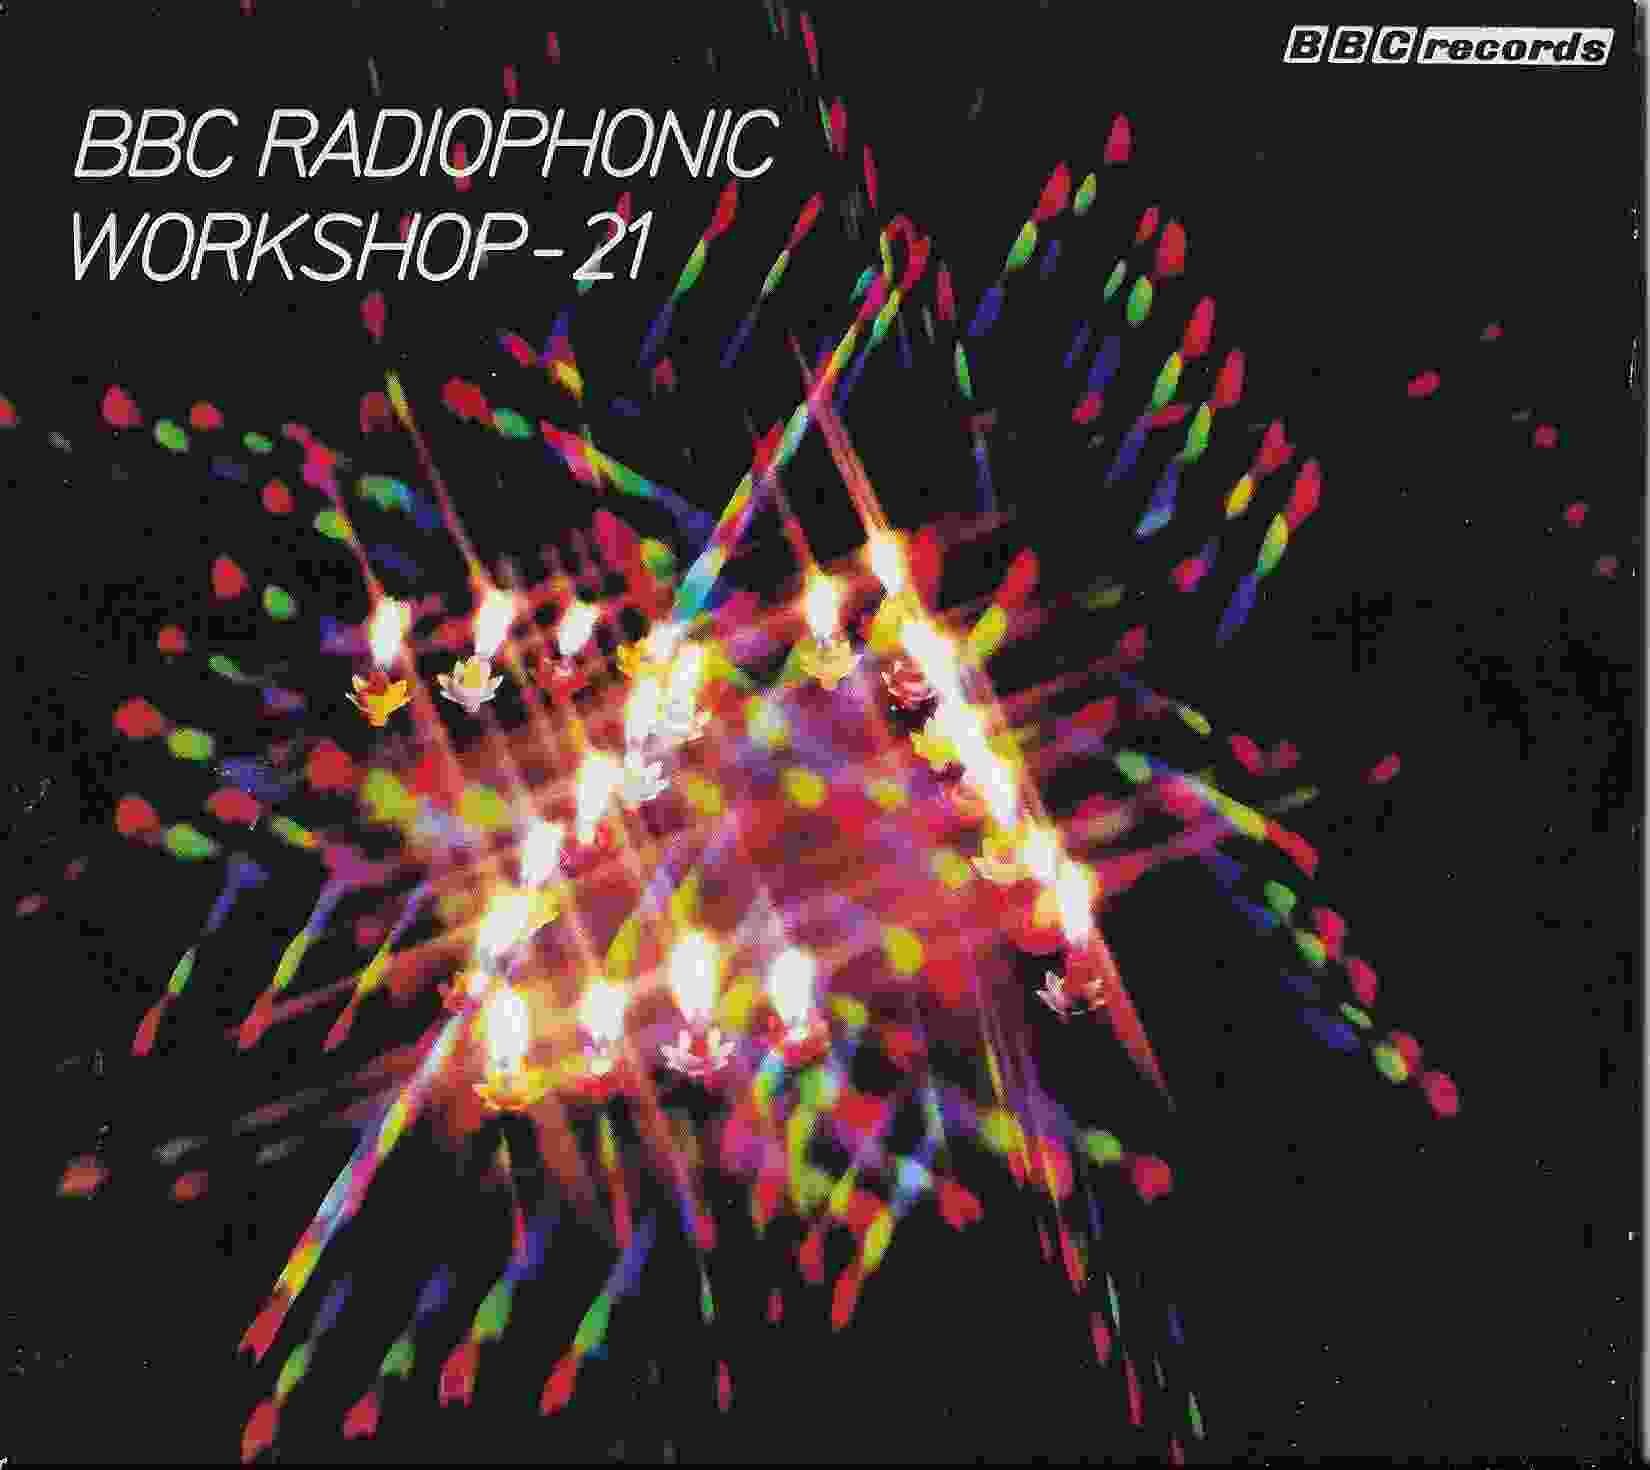 Picture of BBC Radiophonic Workshop - 21 by artist BBC Radiophonic Workshop from the BBC cds - Records and Tapes library